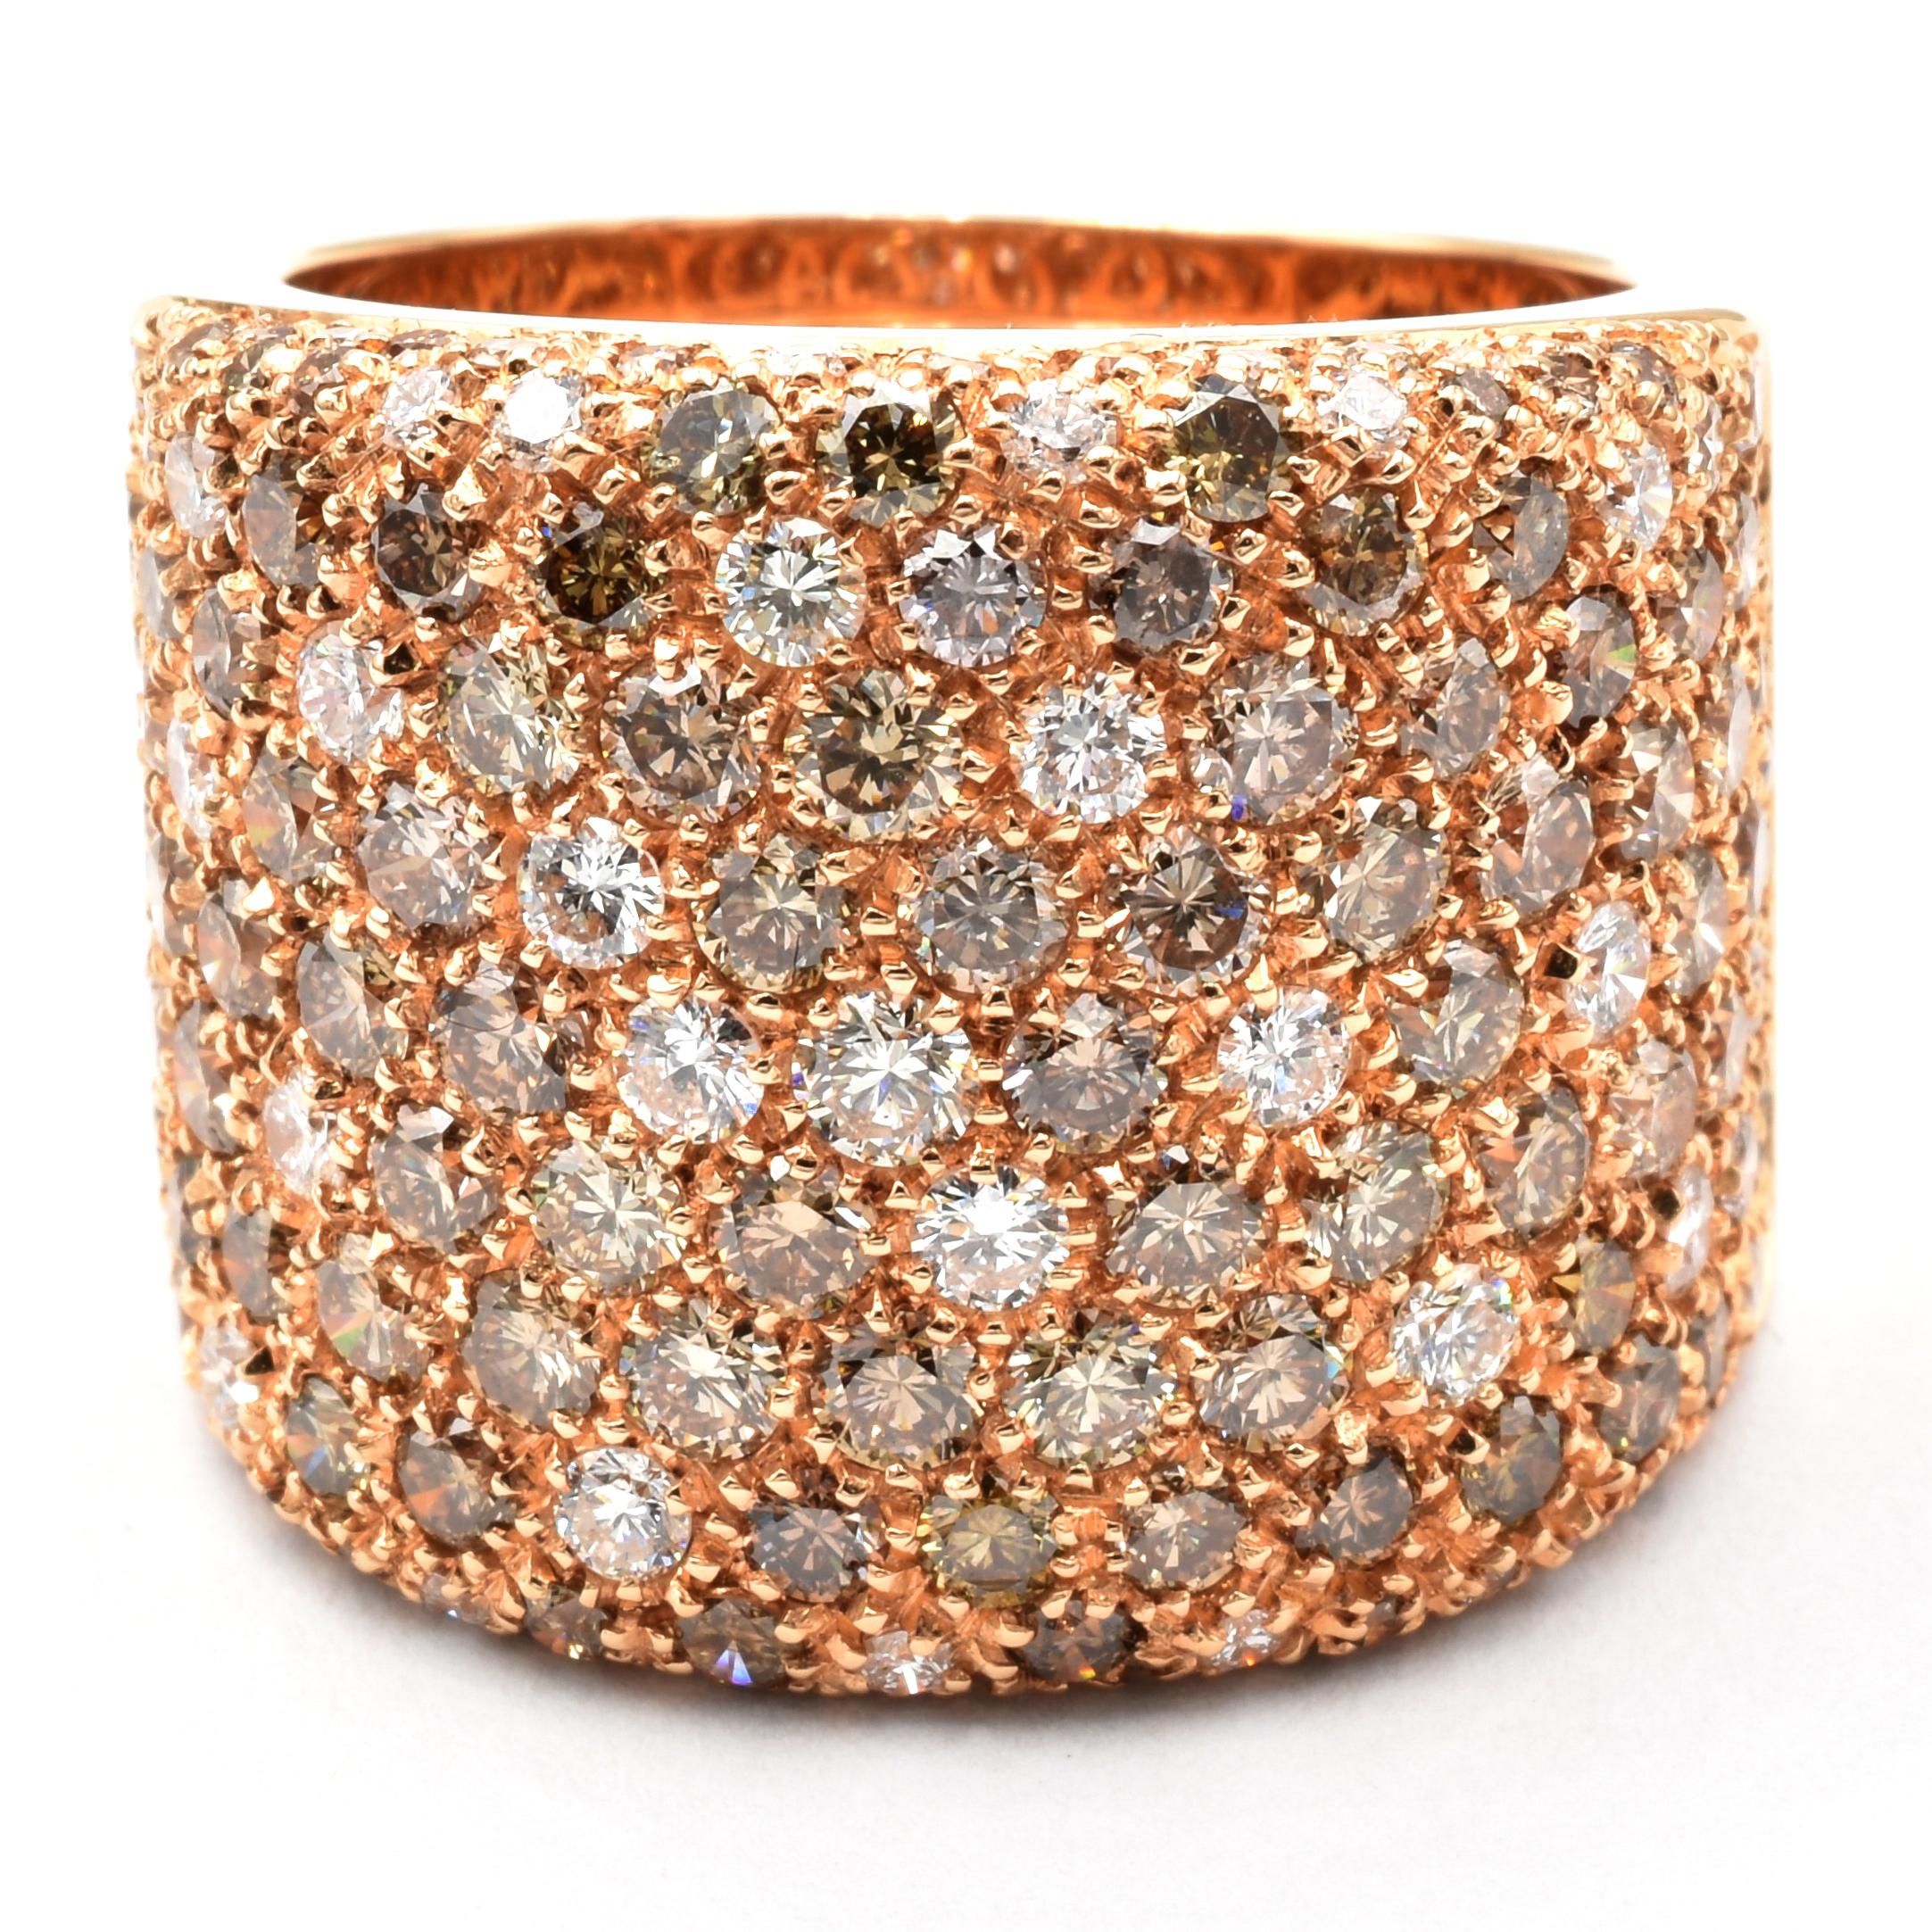 Gilberto Cassola 18Kt Rose Gold Band Ring with a Paveé Set of a mix of Champagne and White Diamonds.
Handmade in Italy in Our Atelier in Valenza (AL)
18Kt Gold g 15.80
G Color Vs Clarity Diamonds ct 3.21
Champagne Vs Clarity Diamonds ct 0.75
This